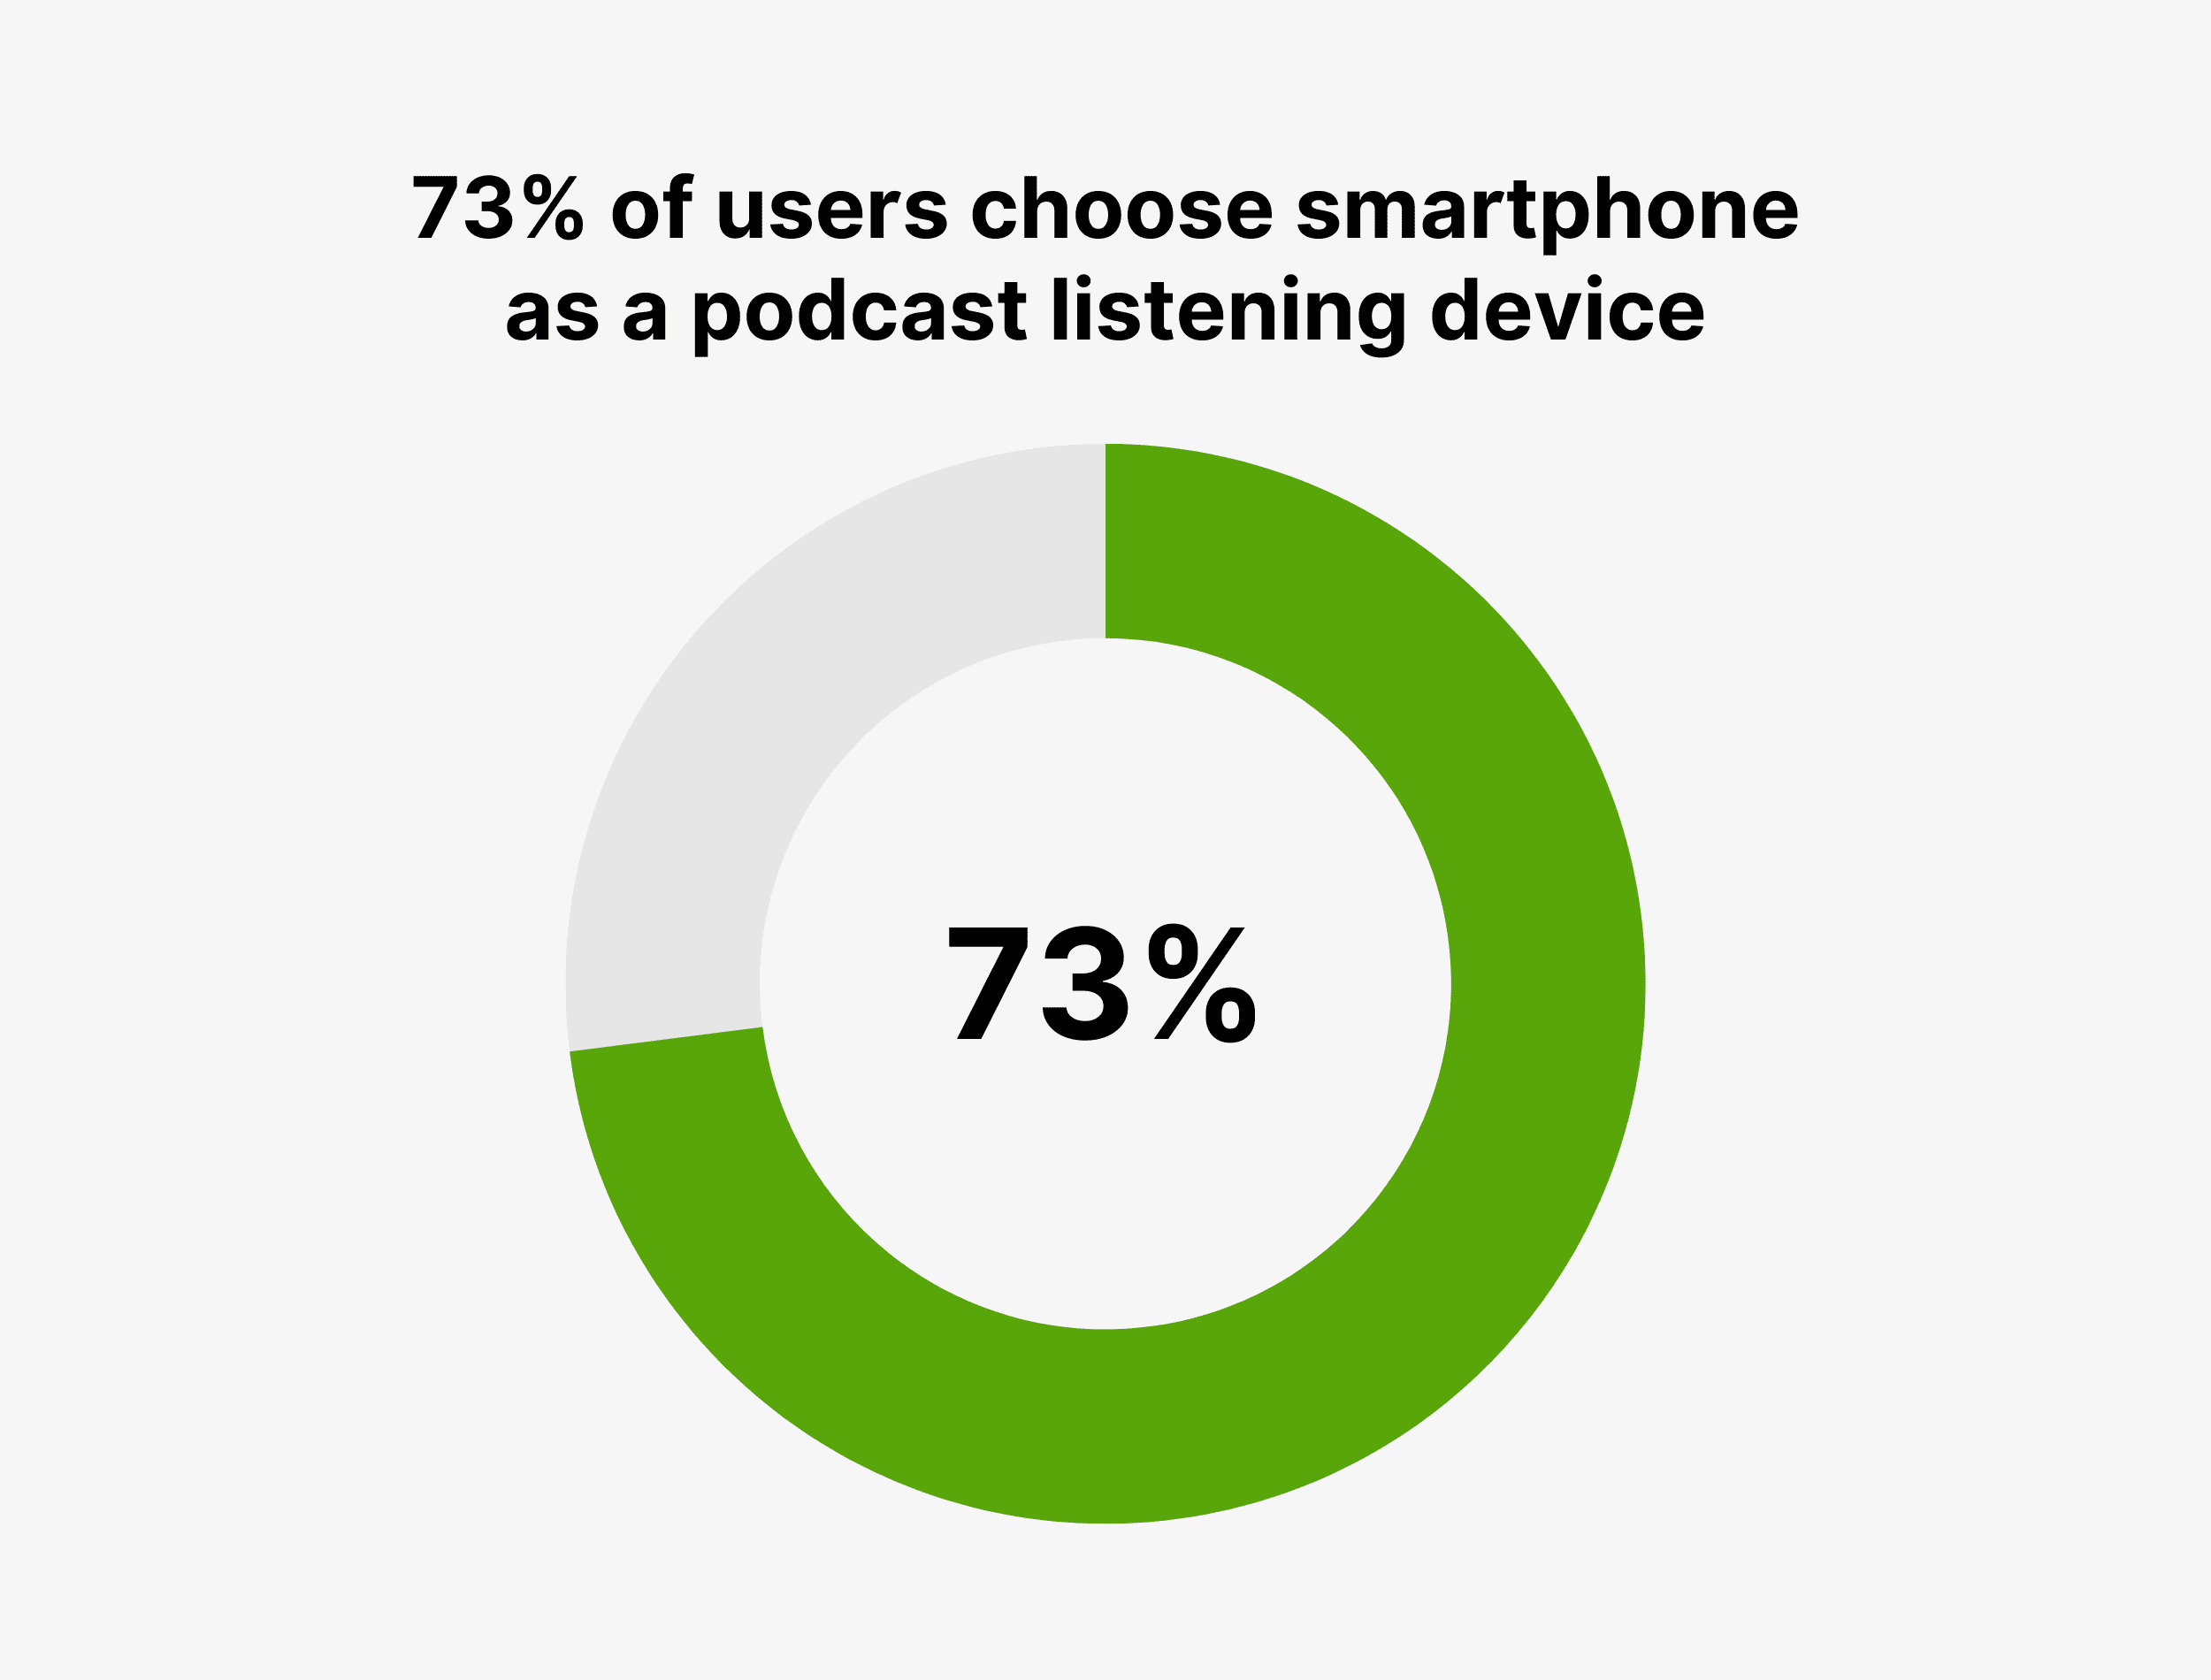 73% of users choose smartphone as a podcast listening device